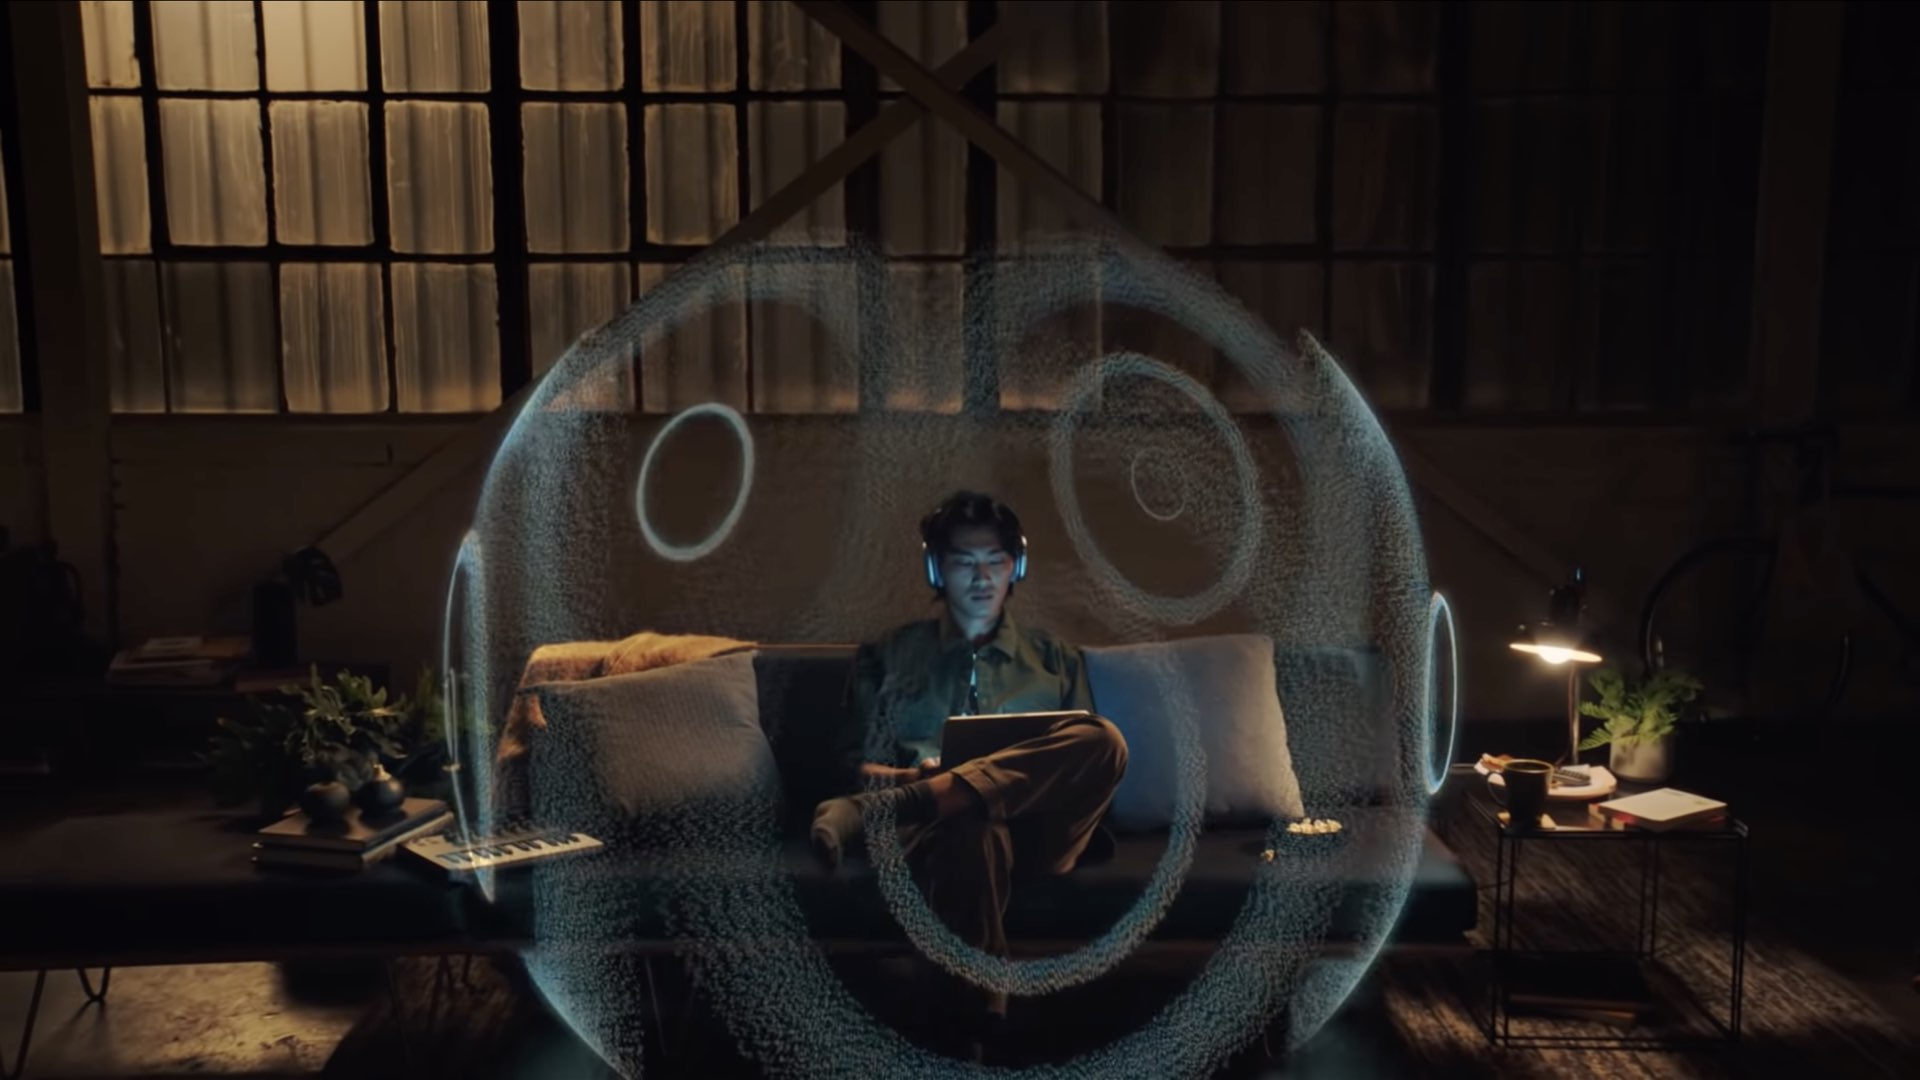 Apple illustration for spatial audio depicting a young male person sitting on their couch, wearing their AirPods Max and listening to music on iPad Pro